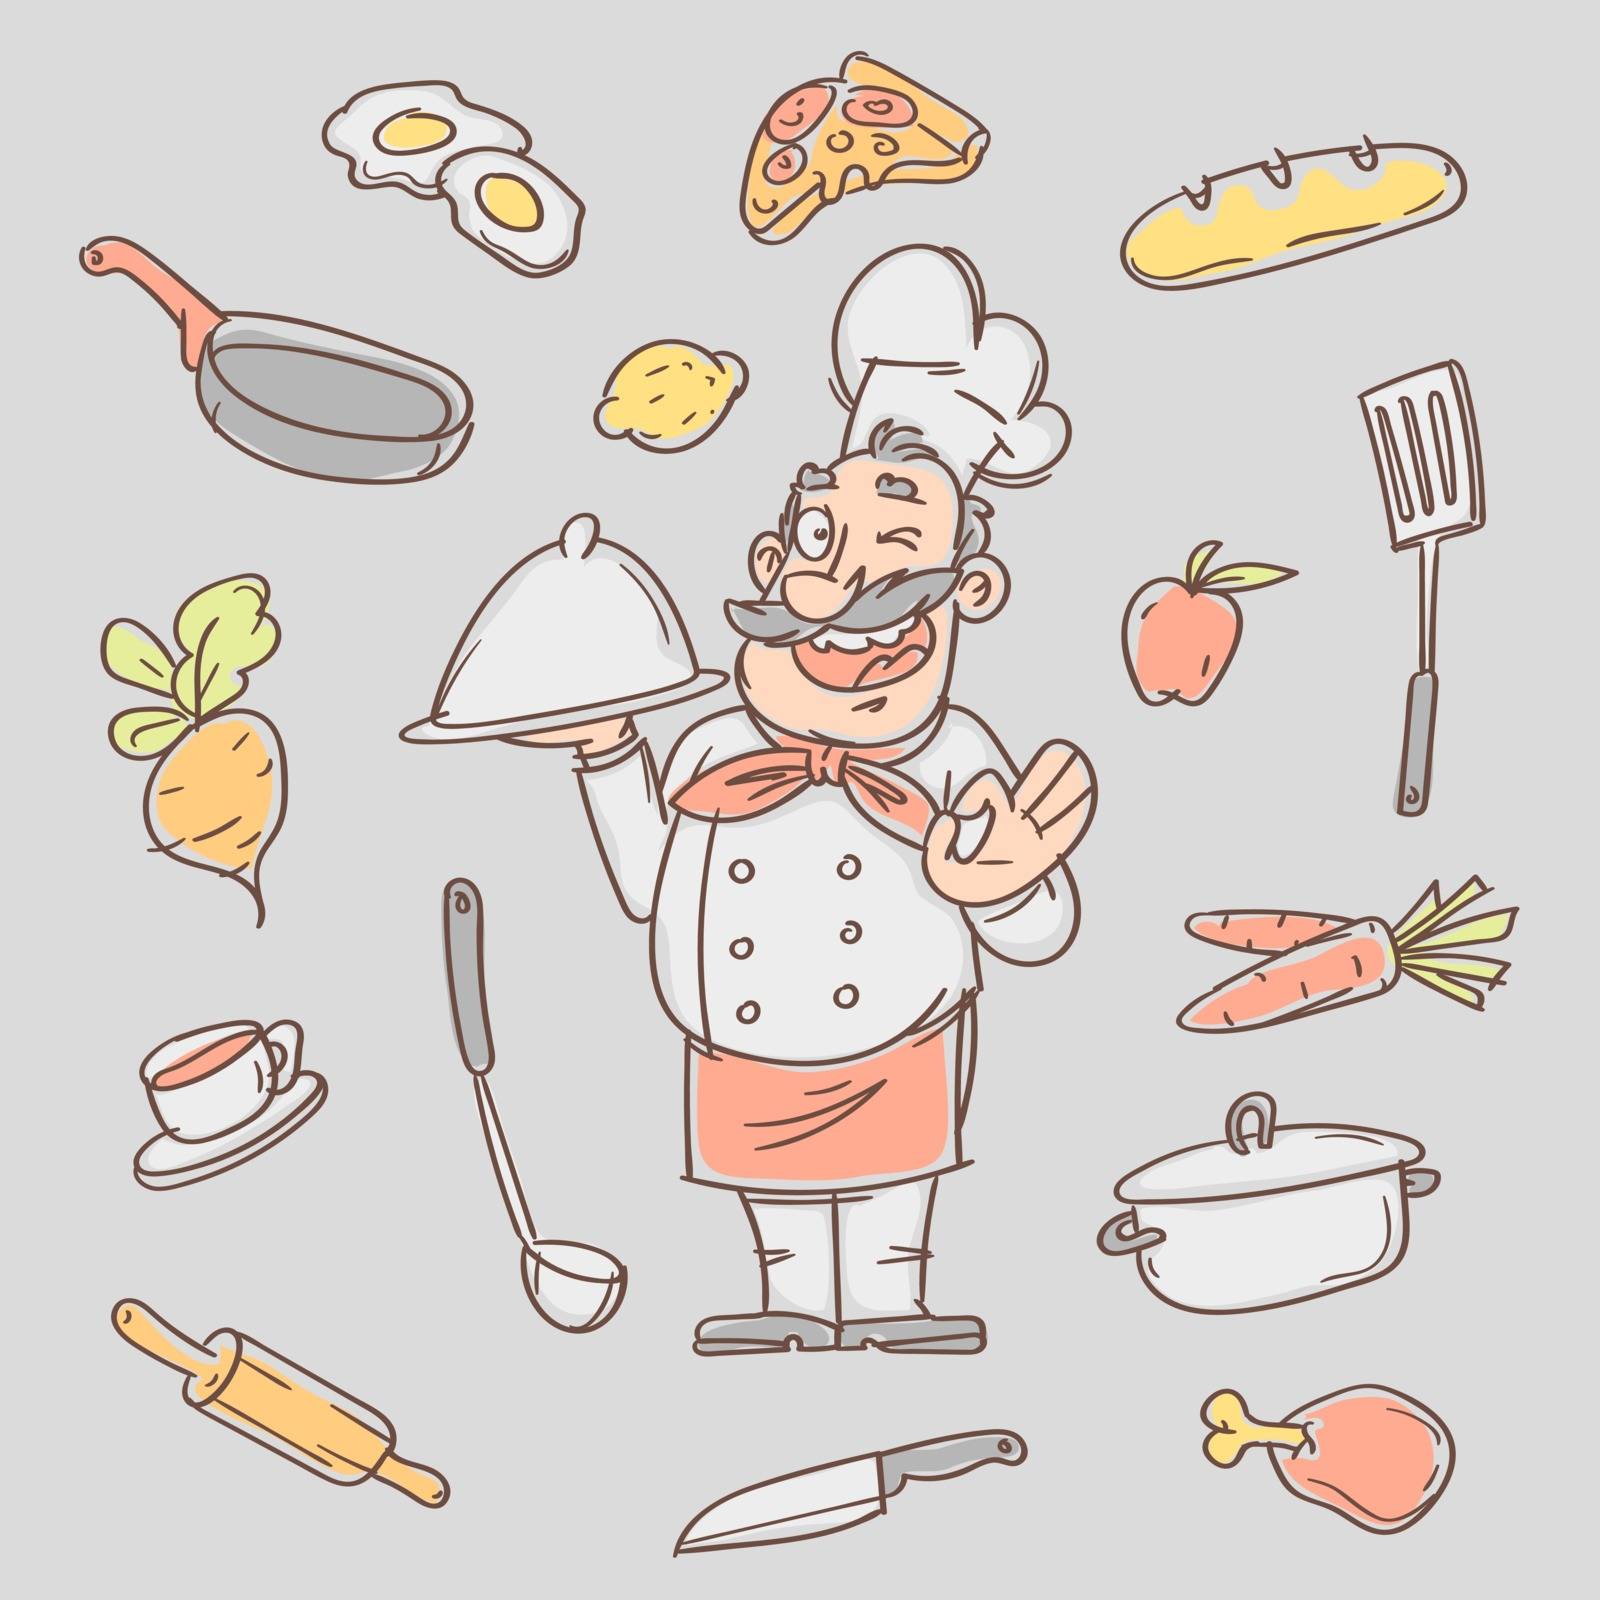 Drawing sketch cook and various kitchen objects. Vector illustration. Sketch Doodle.